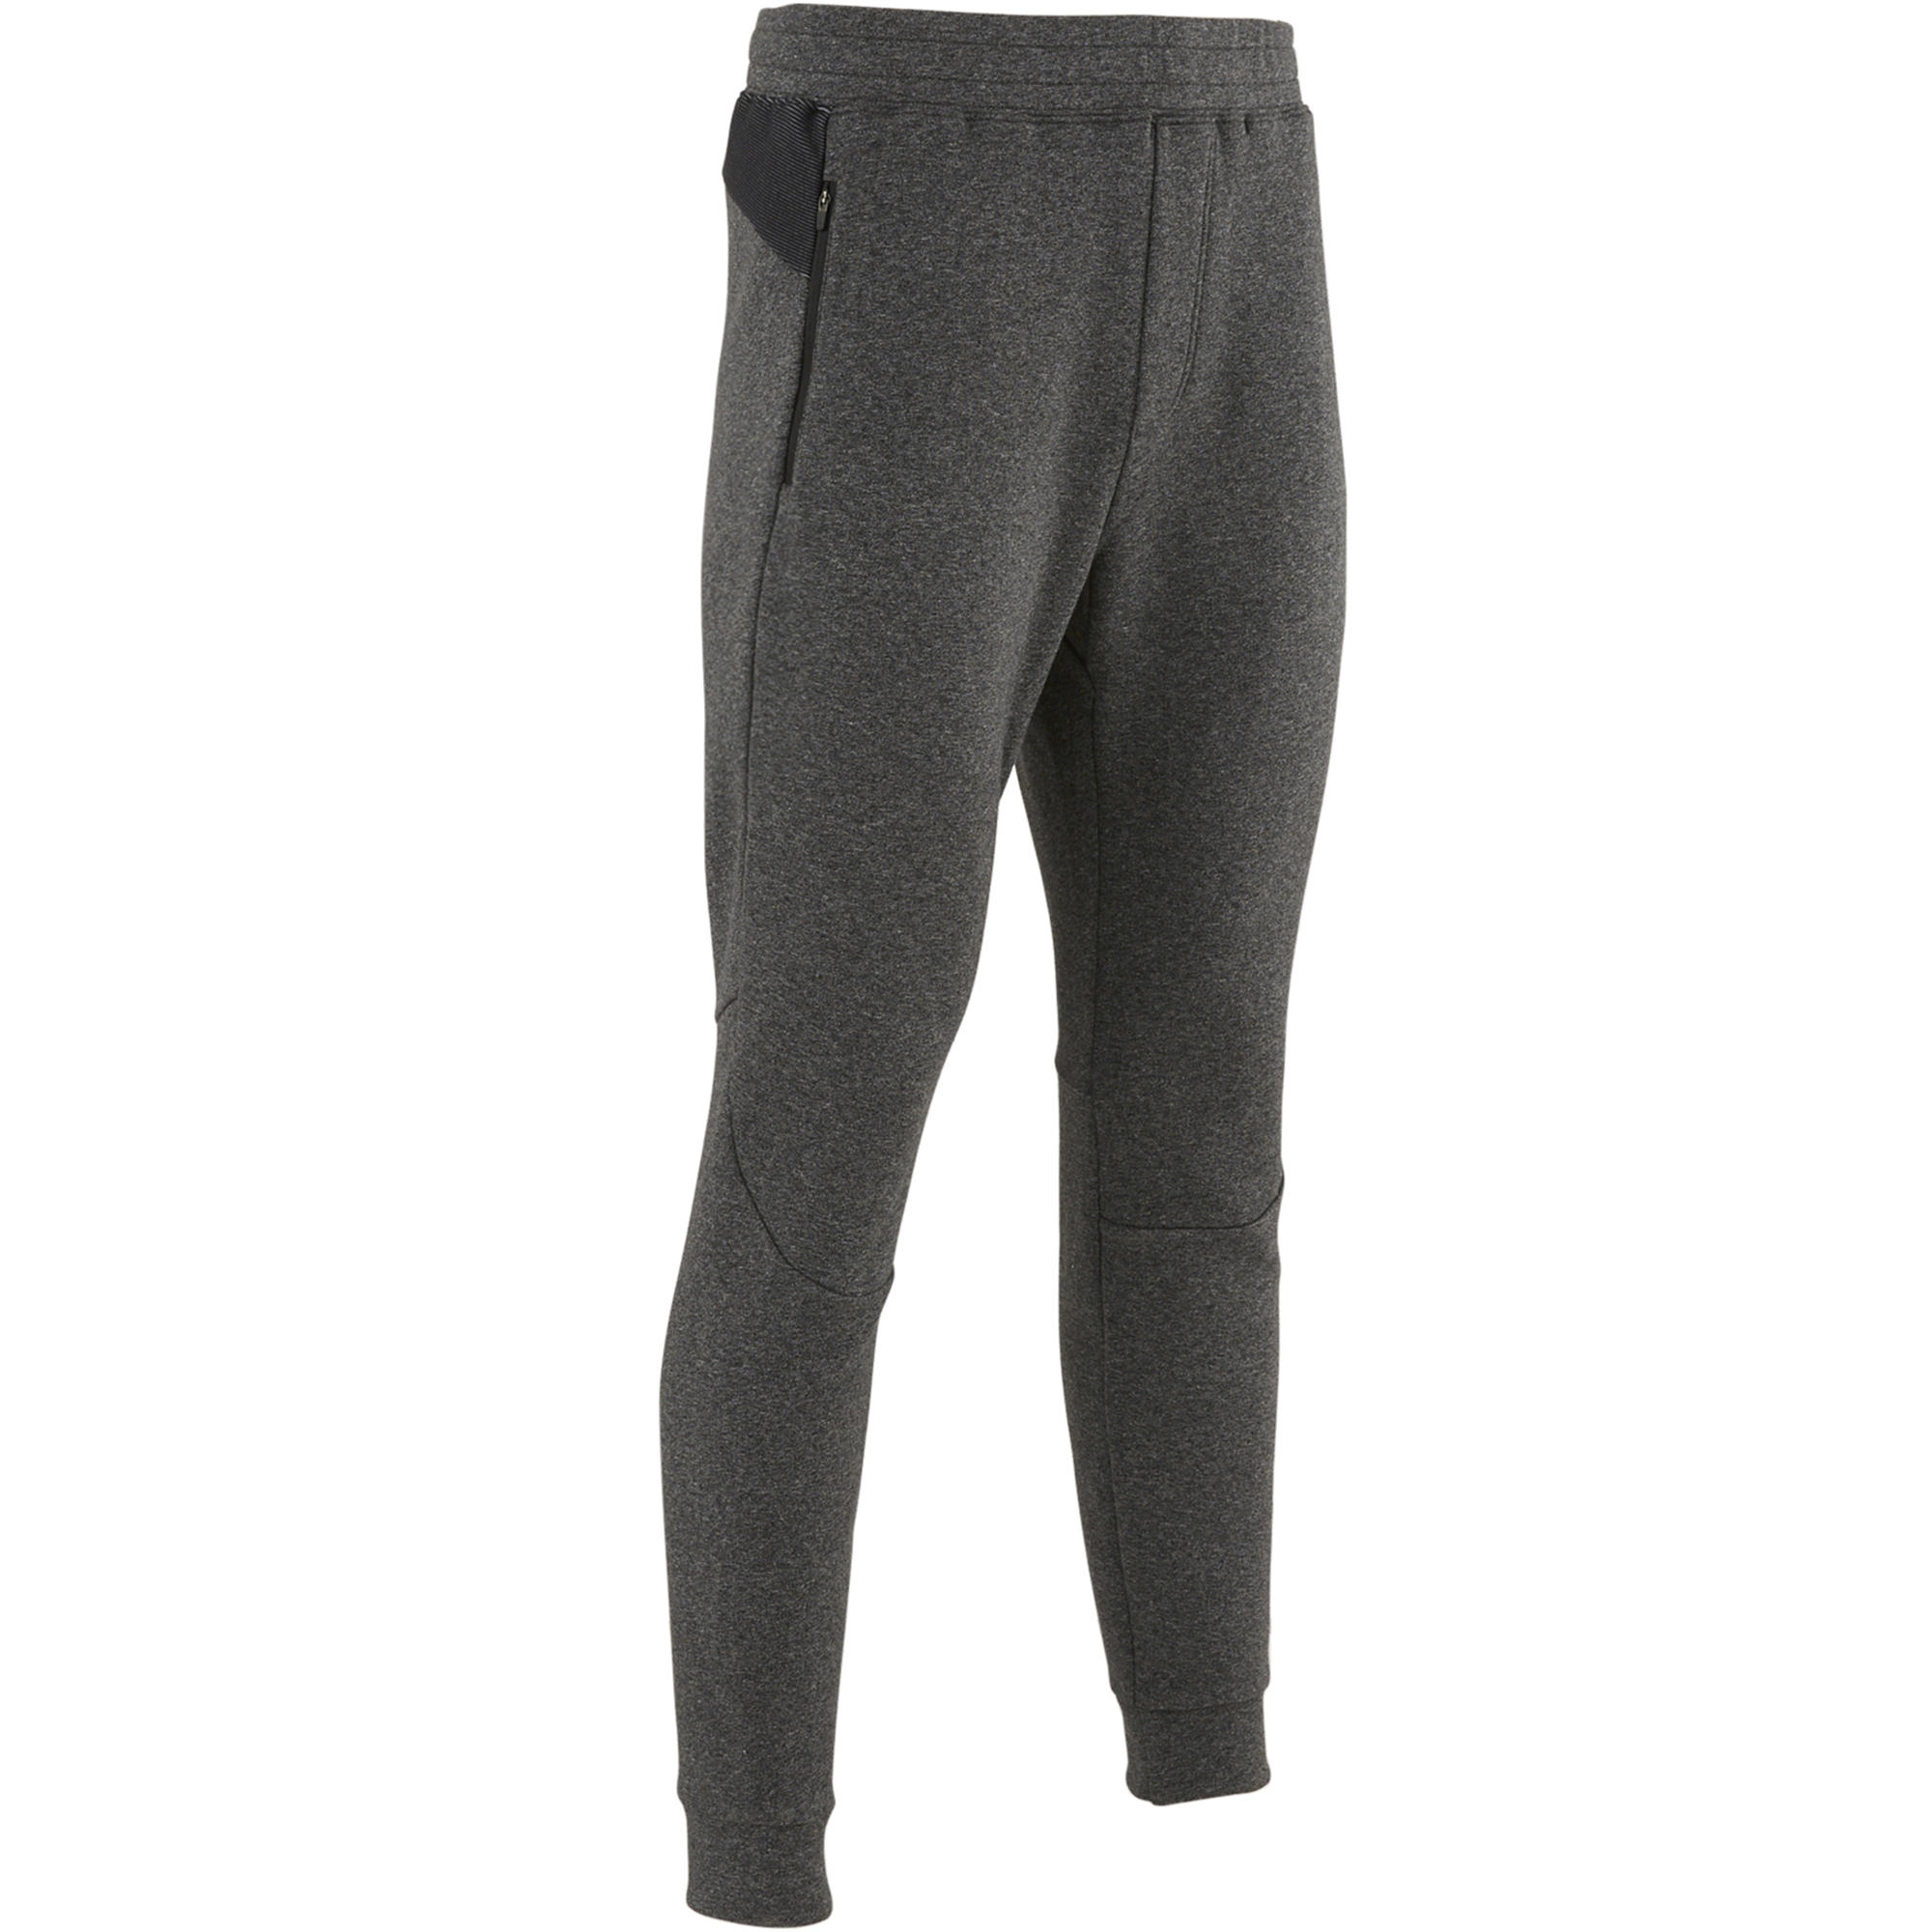 wybzd Women Casual Jogger Thick Sweatpants Cotton High Waist Workout Pants  Cinch Bottom Trousers with Pockets Grey S  Walmartcom